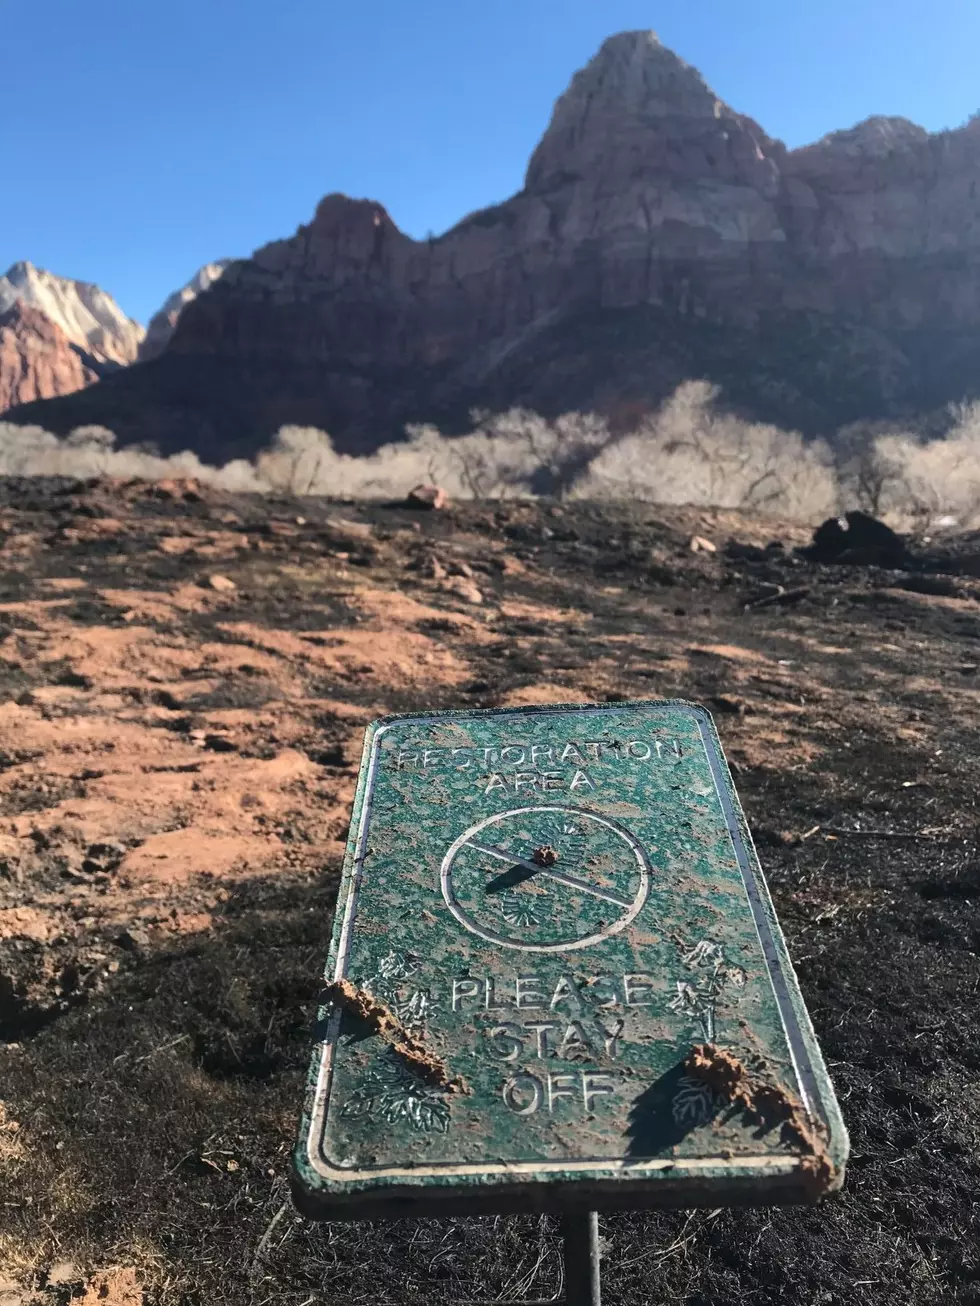 South Entrance Fire Called “Out” at Zion National Park